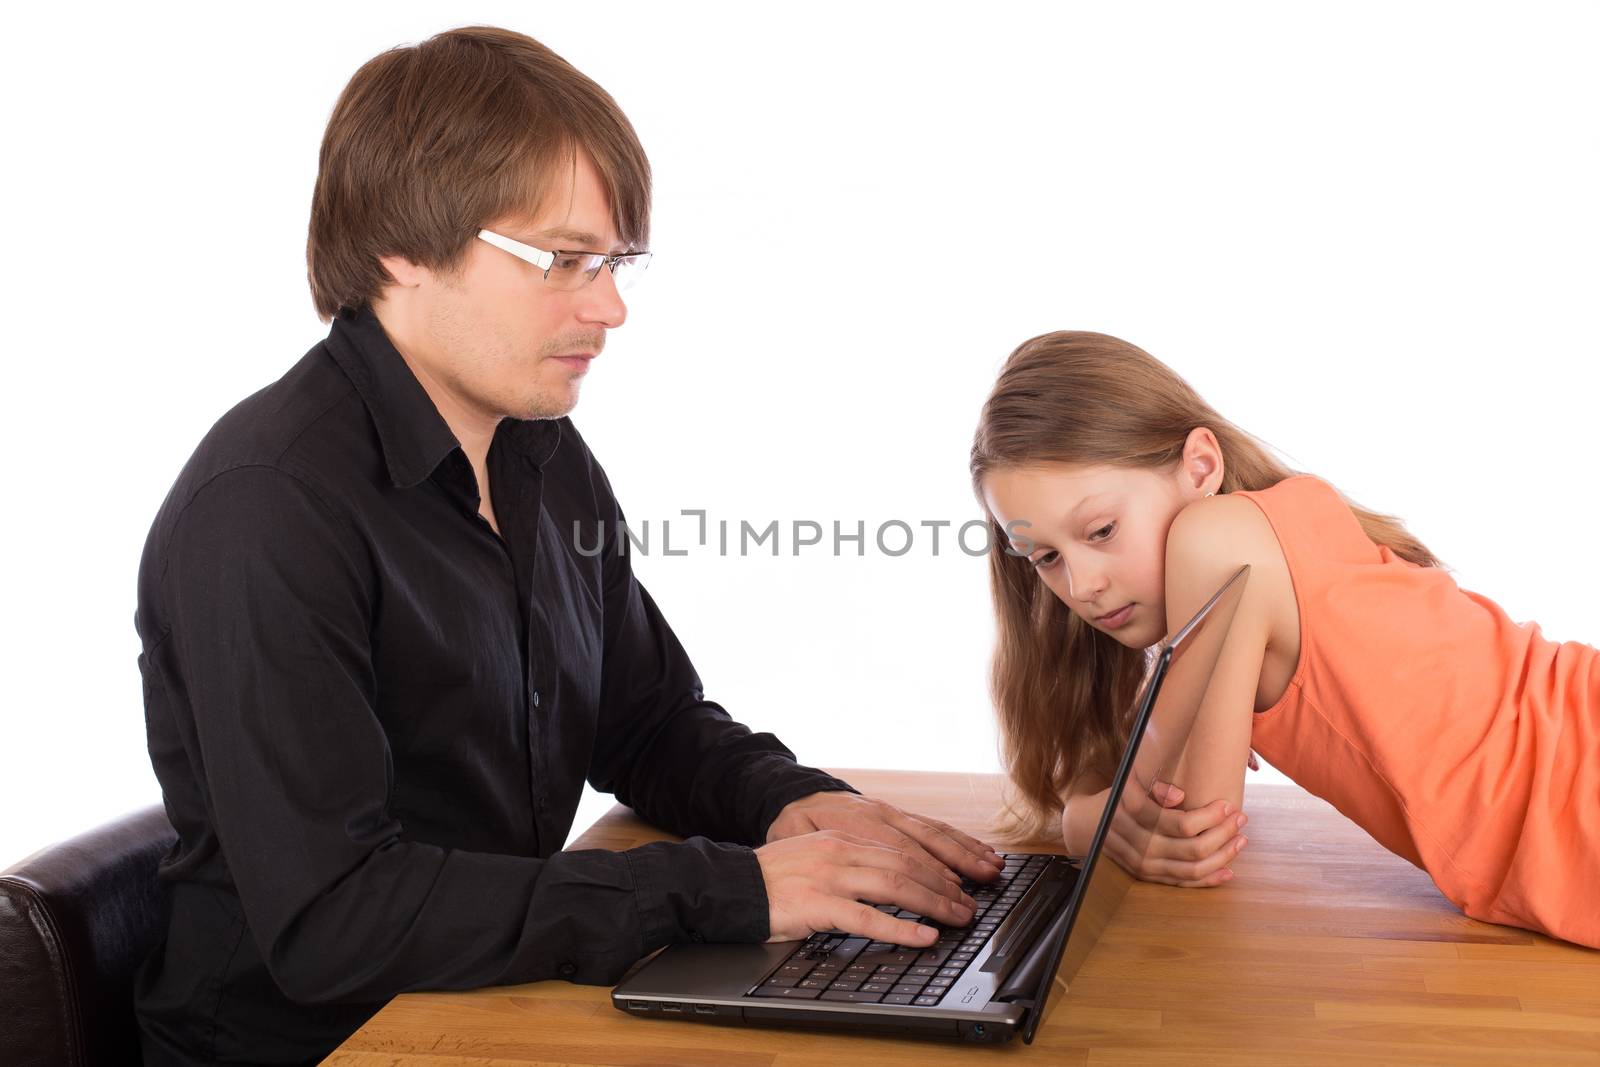 Daughter looks at her father's laptop. Isolated on a white background.